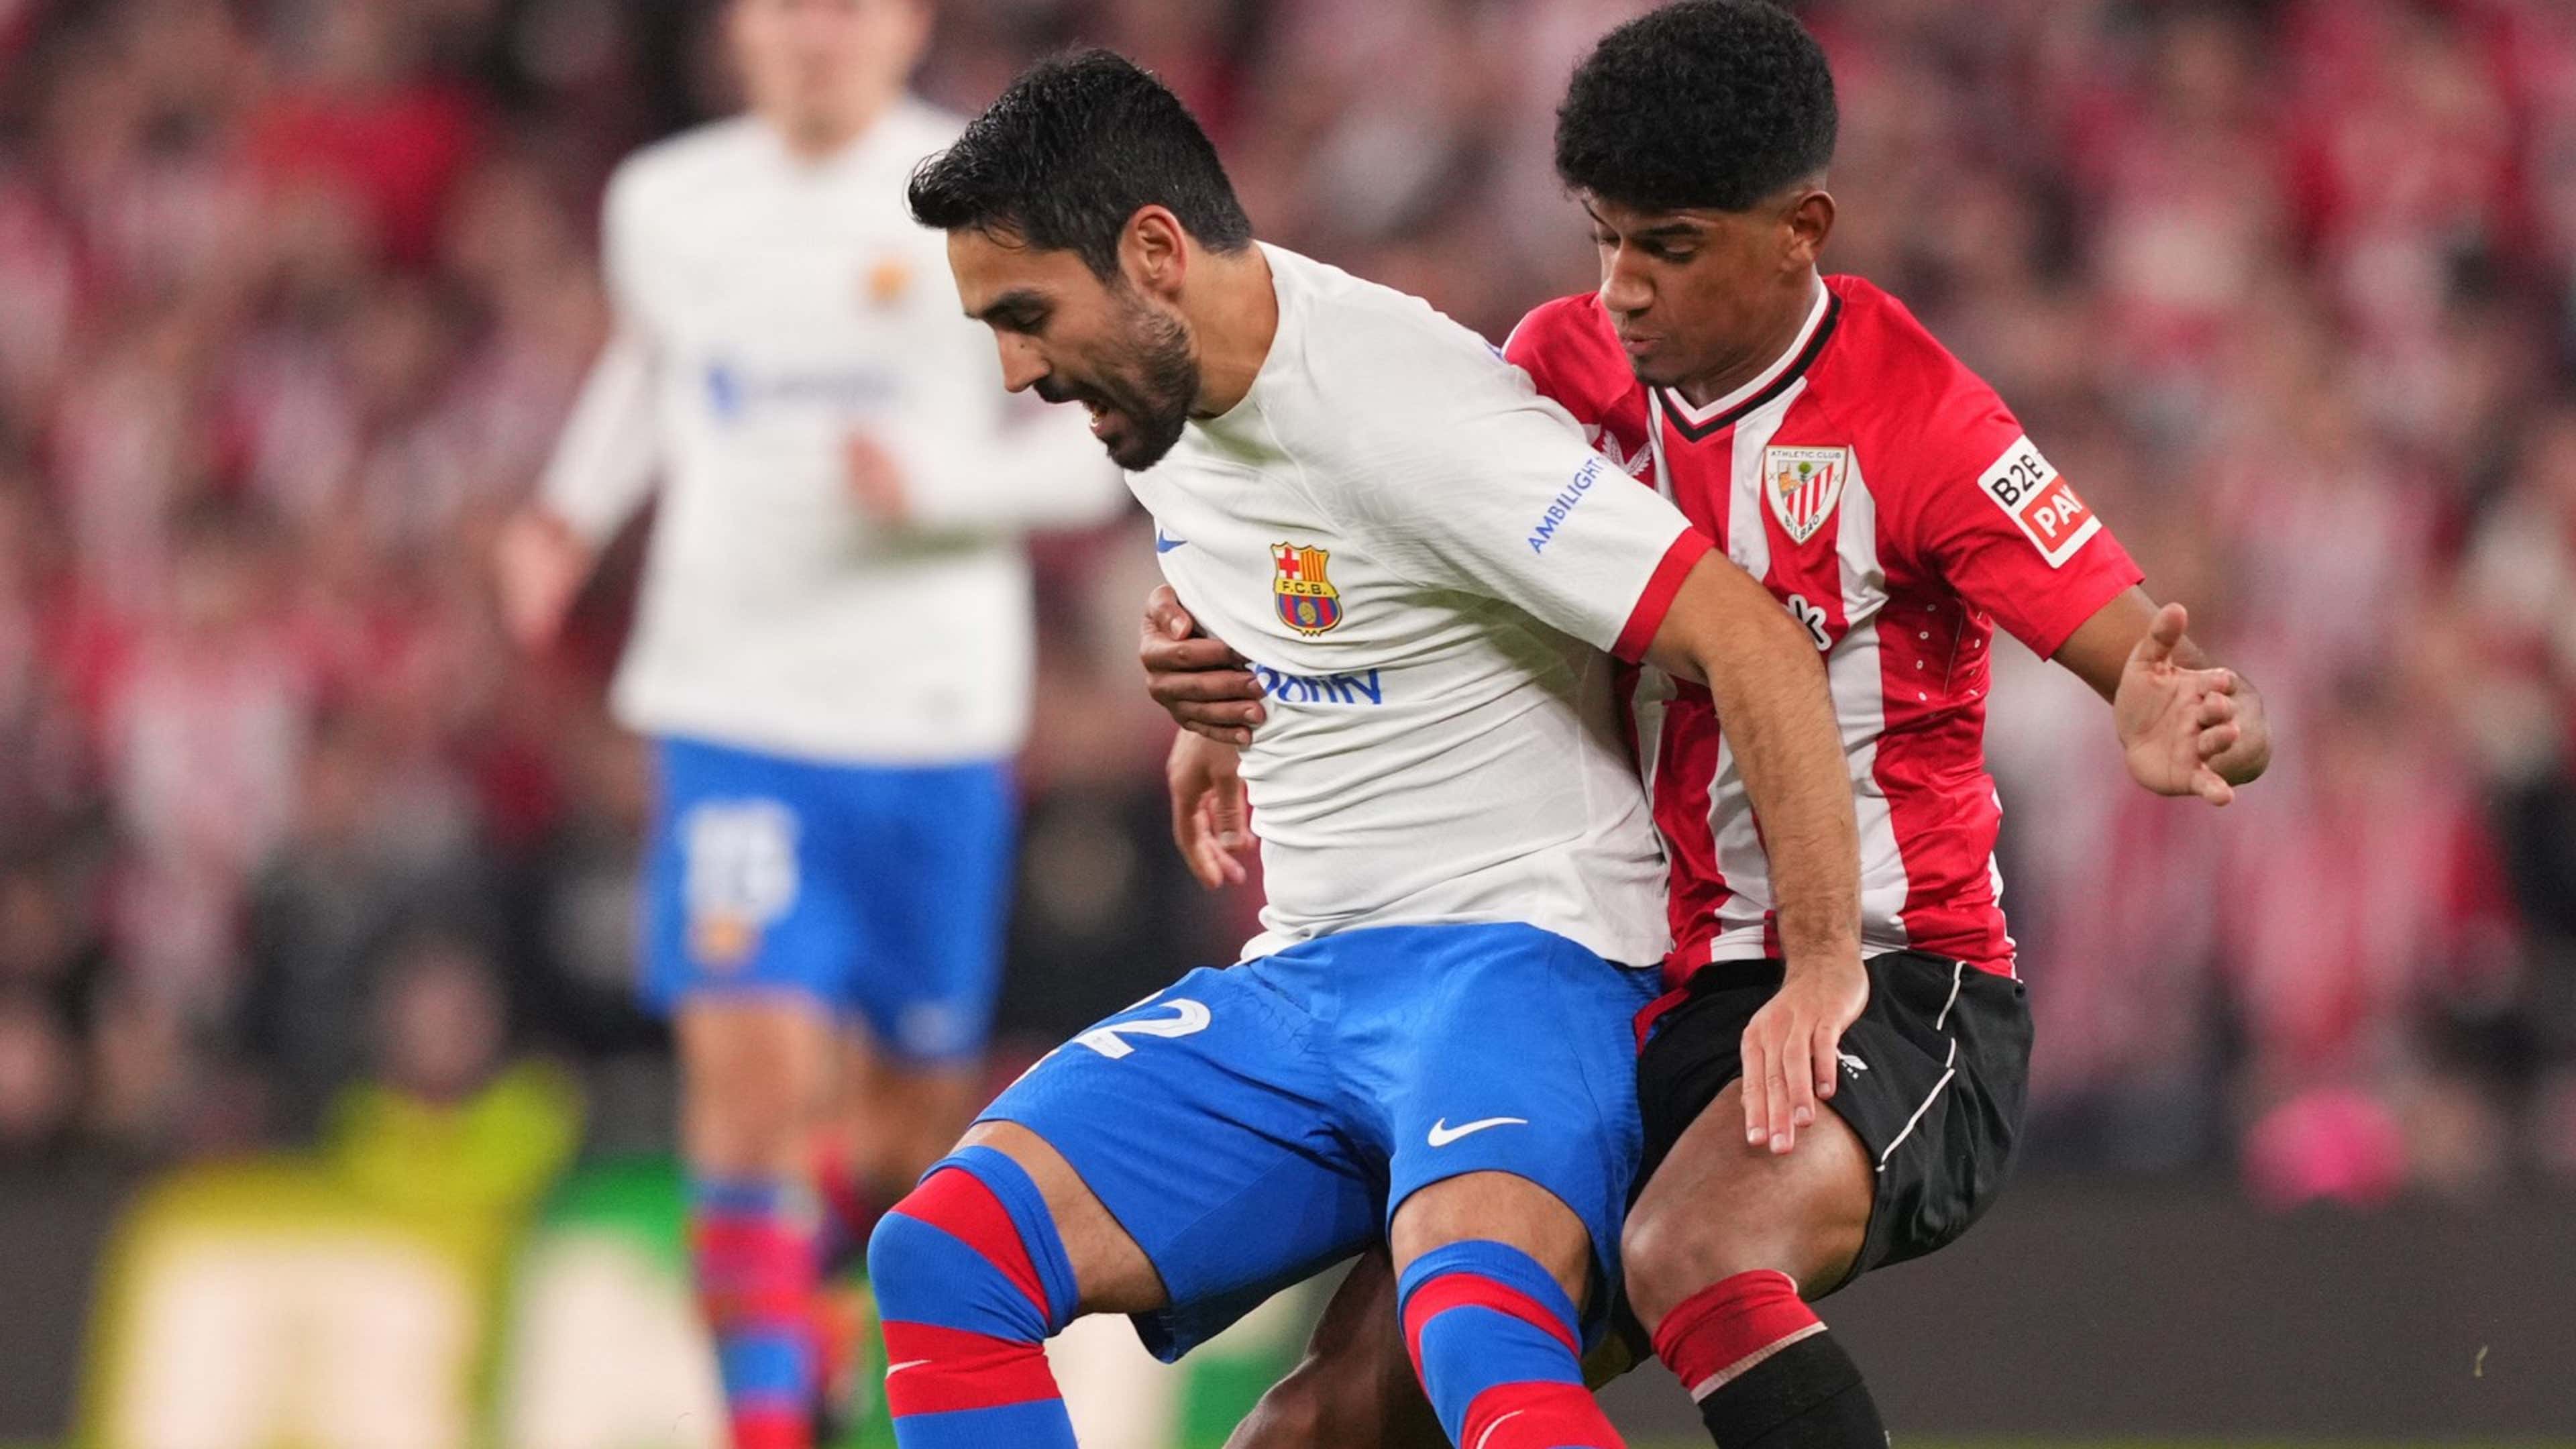 Athletic Club could have key man back for Barcelona clash as